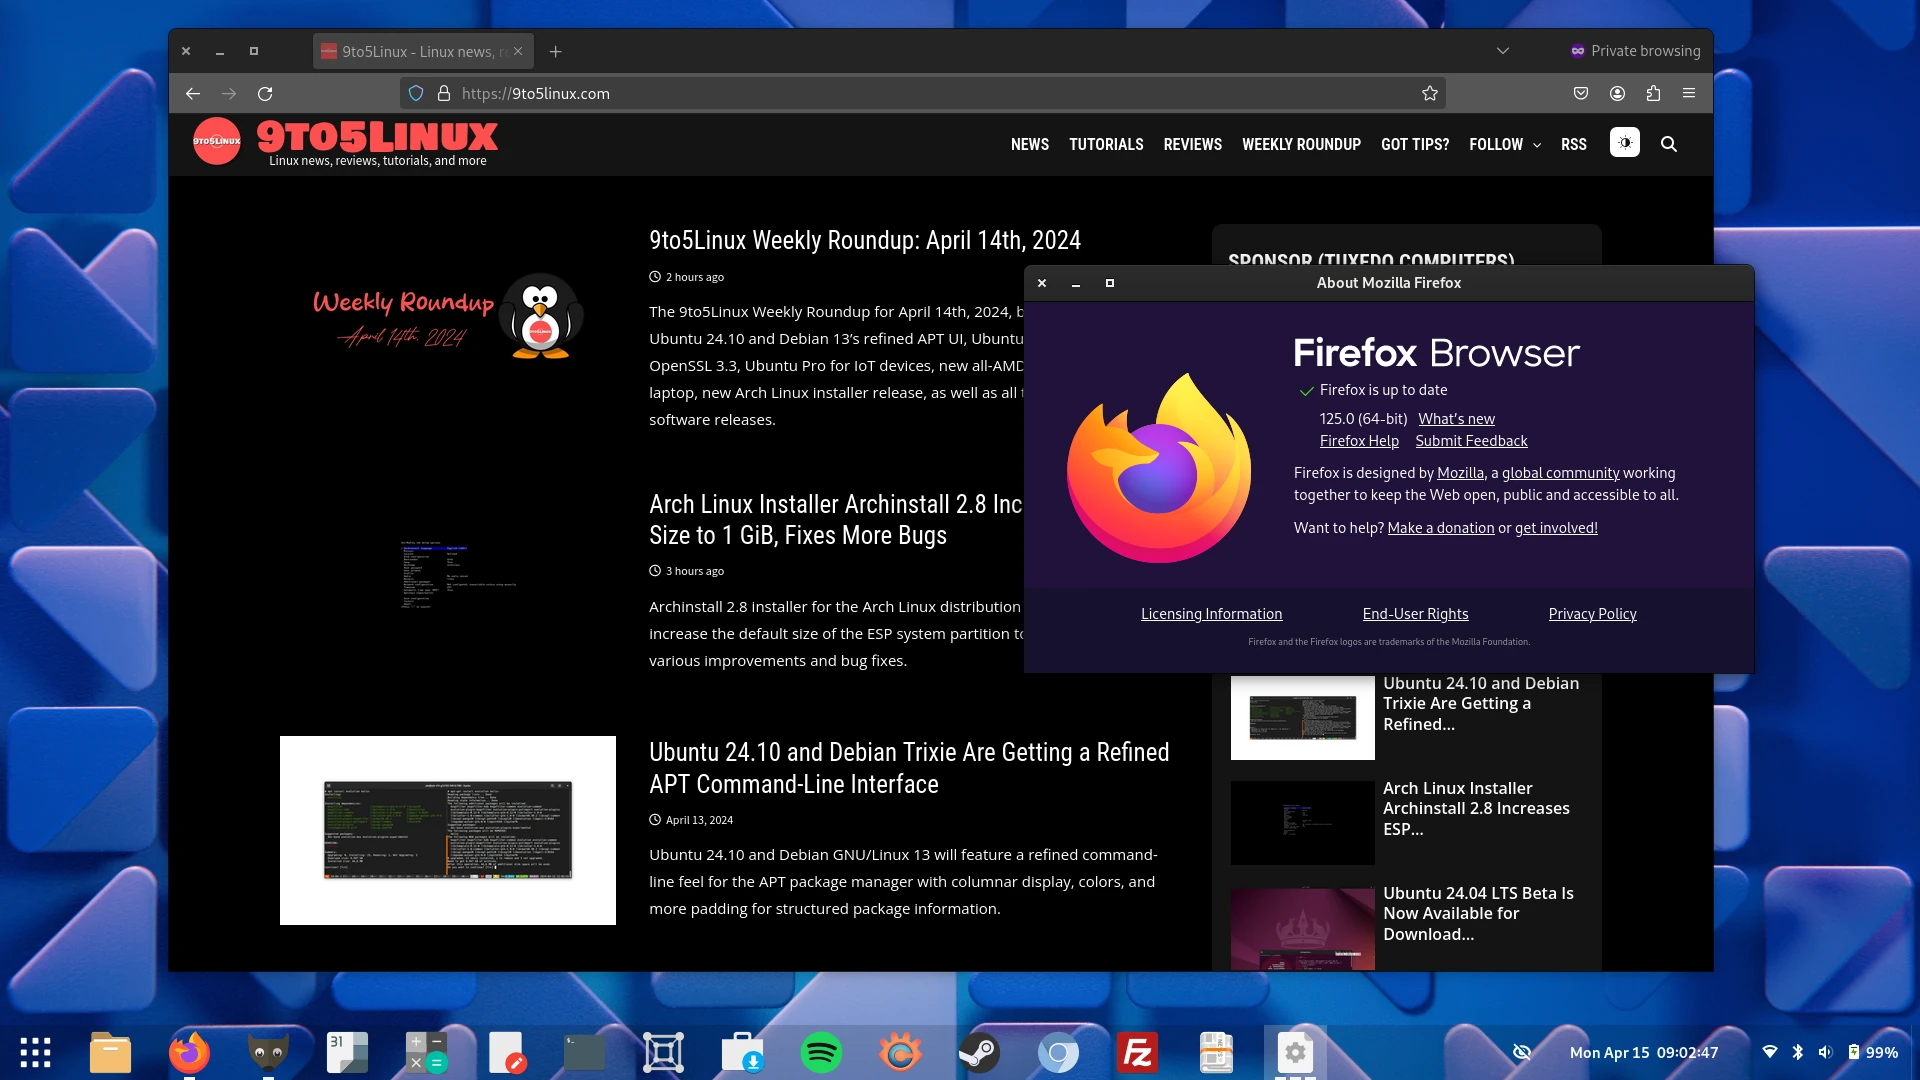 Mozilla Firefox 125 Is Now Available for Download, This Is What’s New